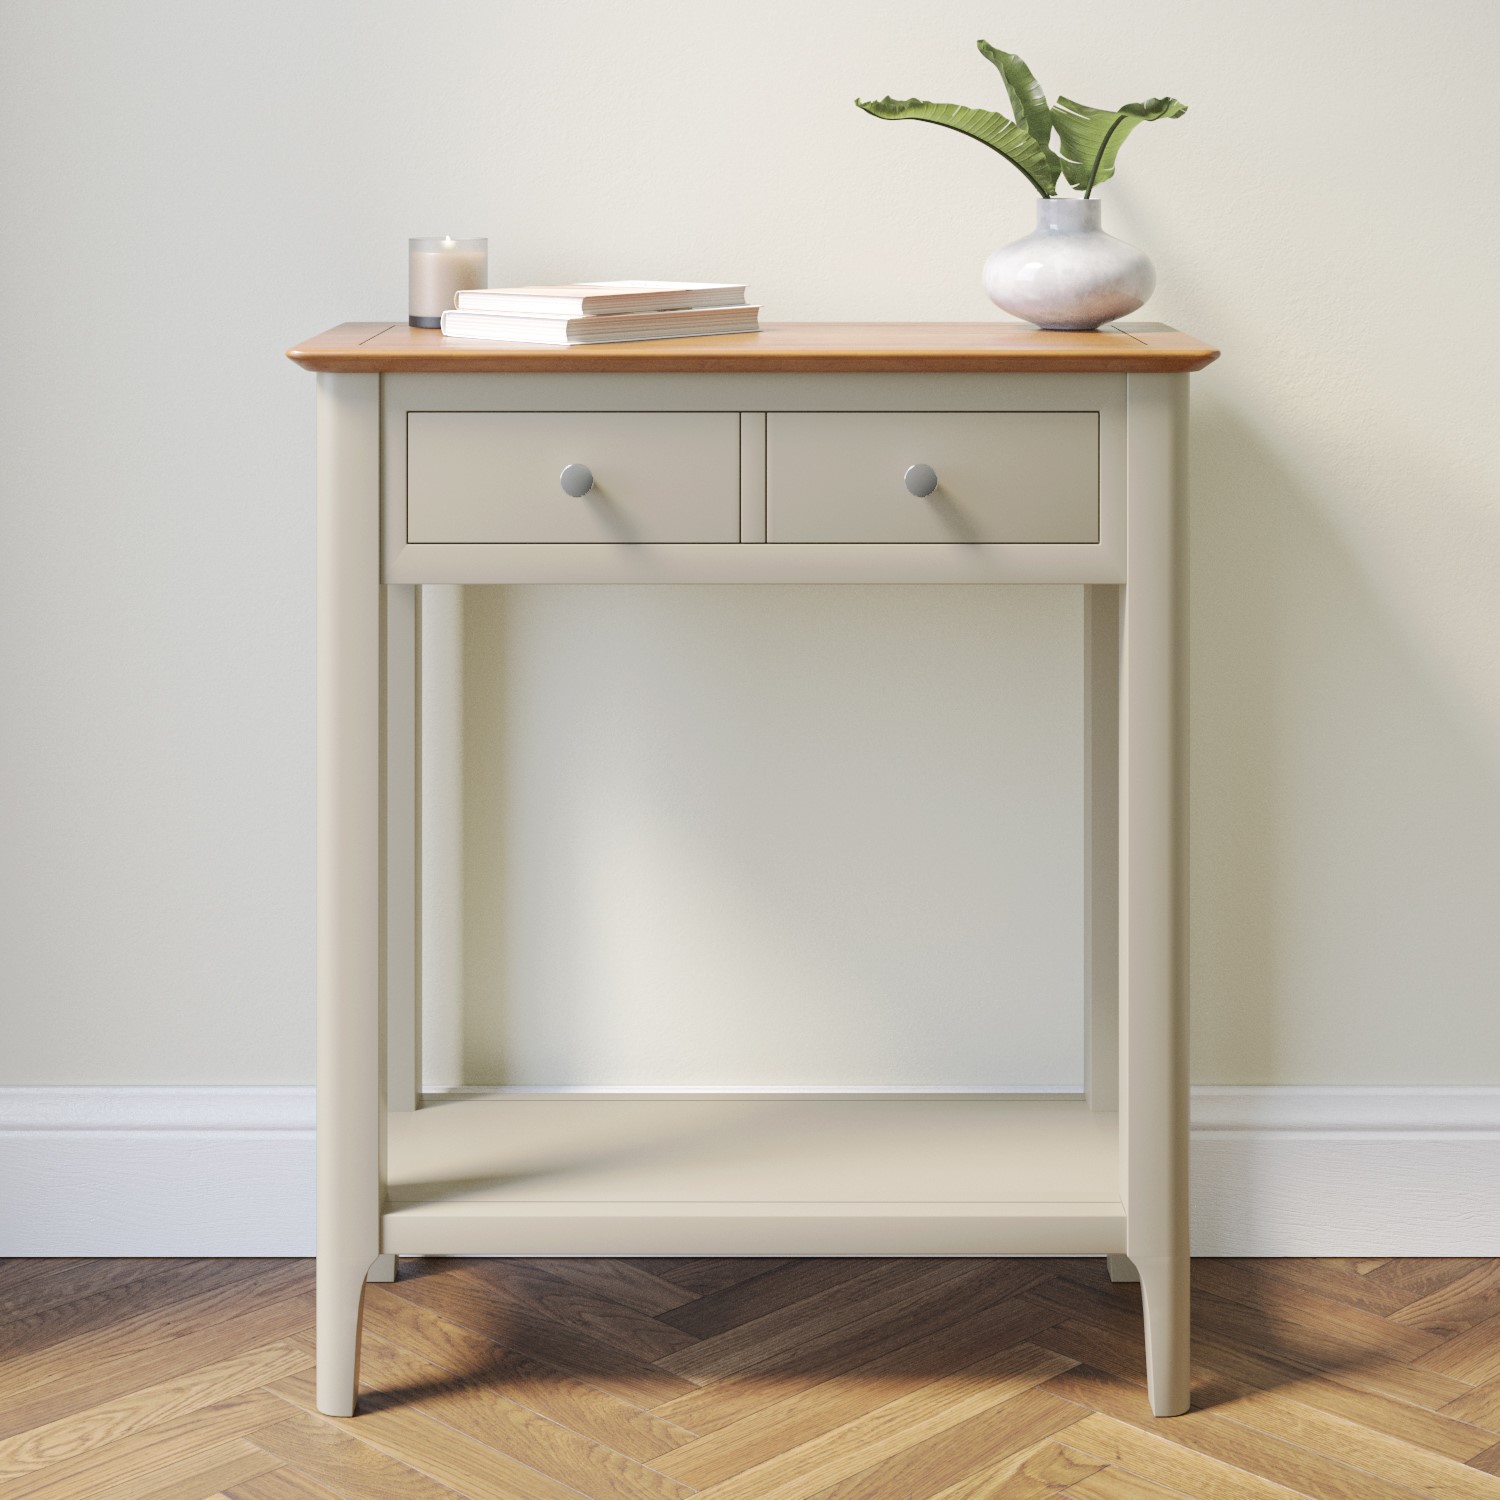 Photo of Narrow dove grey and oak console table with 1 drawer - adeline